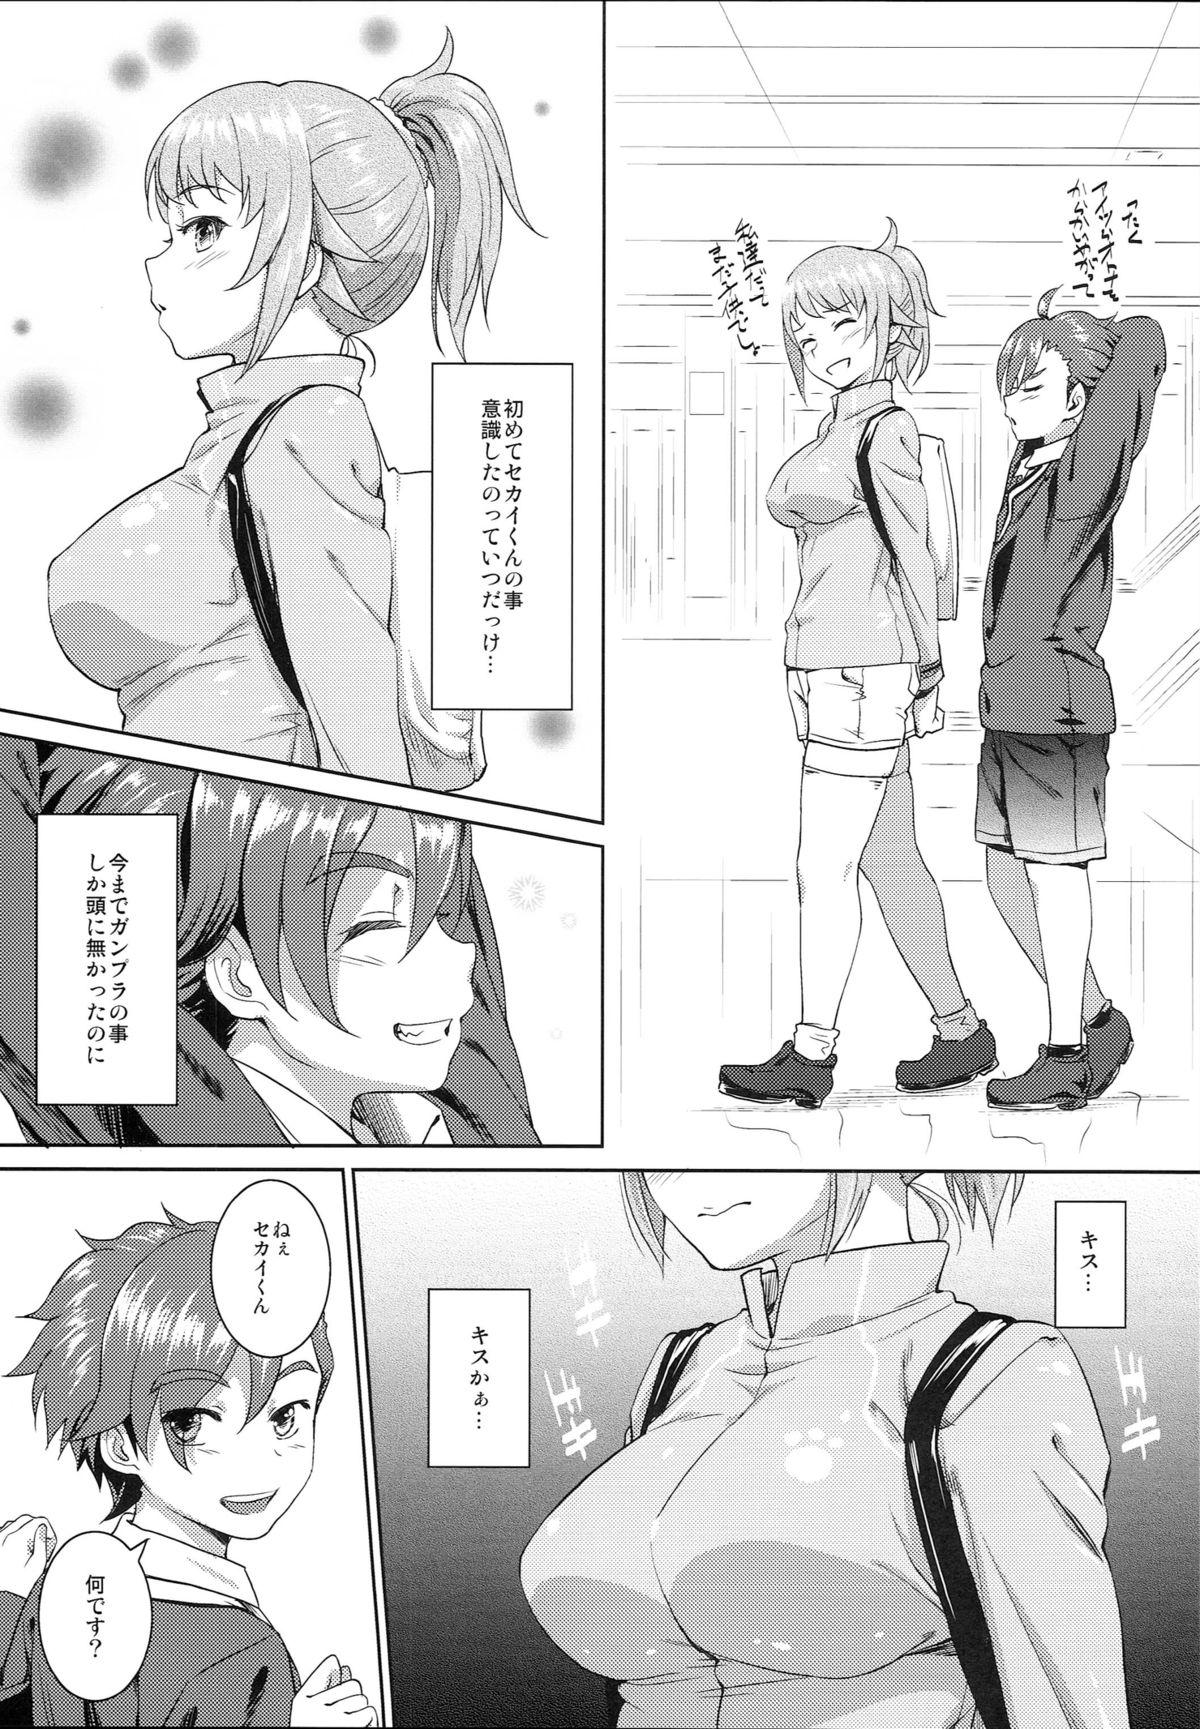 Gays Fumina no sekai - Gundam build fighters try Rough Sex - Page 2